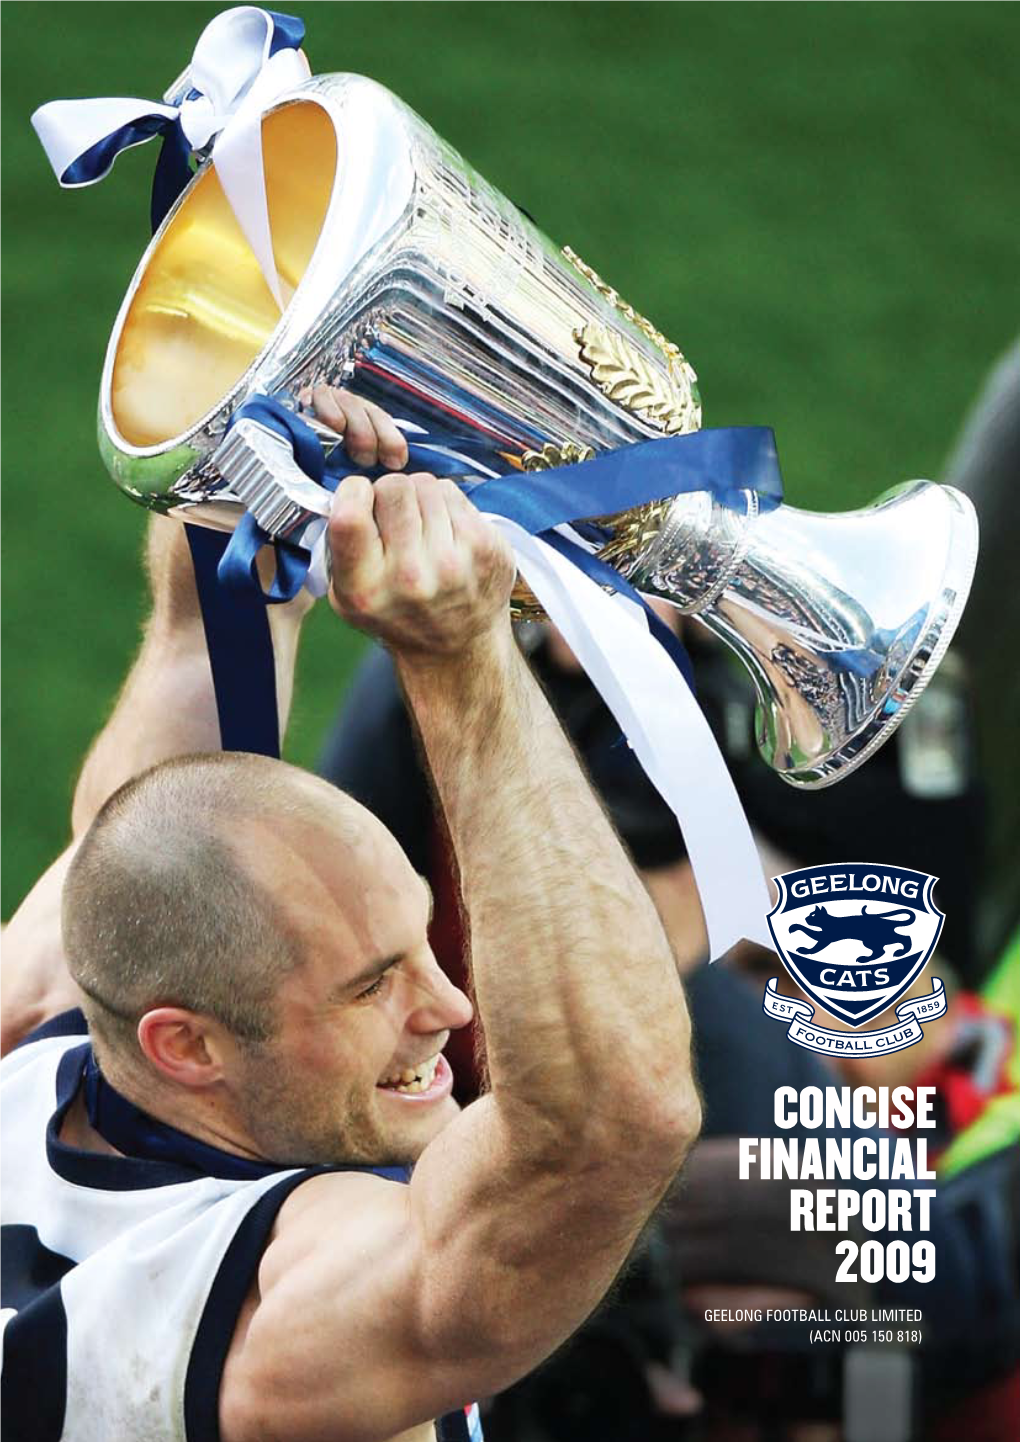 Concise Financial Report 2009 GEELONG FOOTBALL CLUB LIMITED (ACN 005 150 818) 2 Geelong Cats Concise Financial Report 2009 3